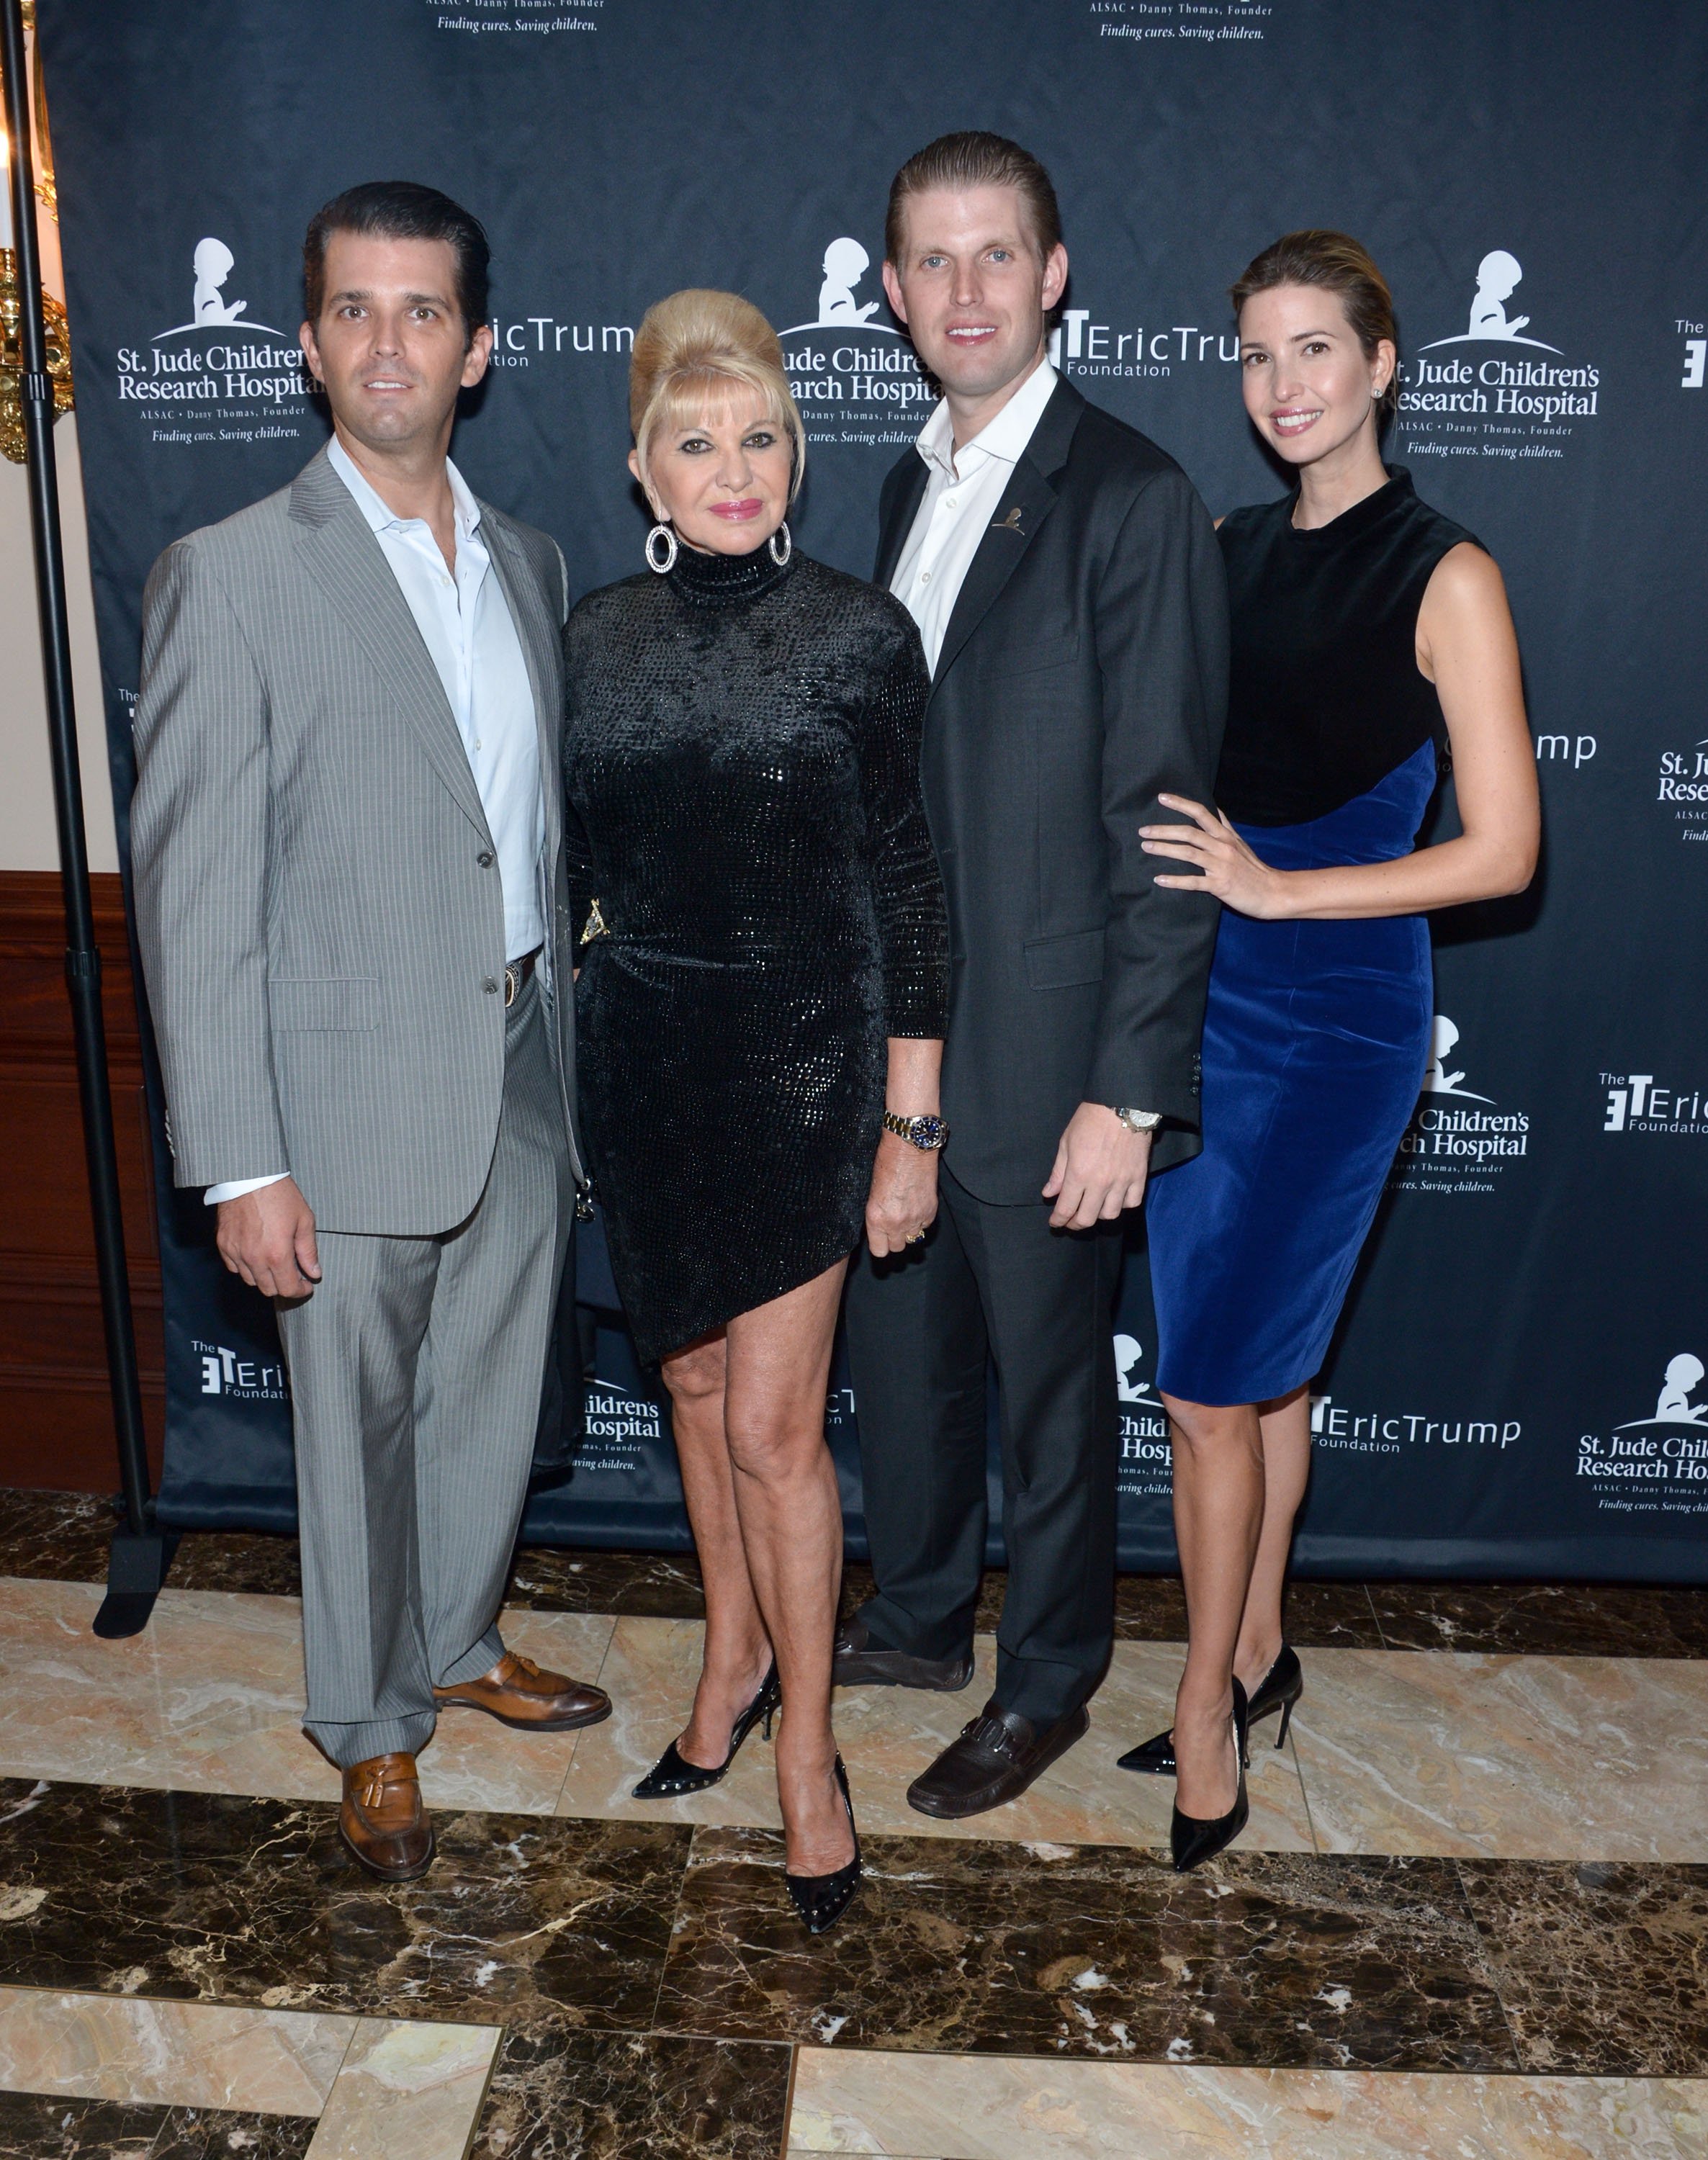 Donald Trump Jr., Ivana Trump, Eric Trump and Ivanka Trump attend the 9th Annual Eric Trump Foundation Golf Invitational Auction & Dinner at Trump National Golf Club Westchester on September 21, 2015 in Briarcliff Manor, New York.┃Source: Getty Images